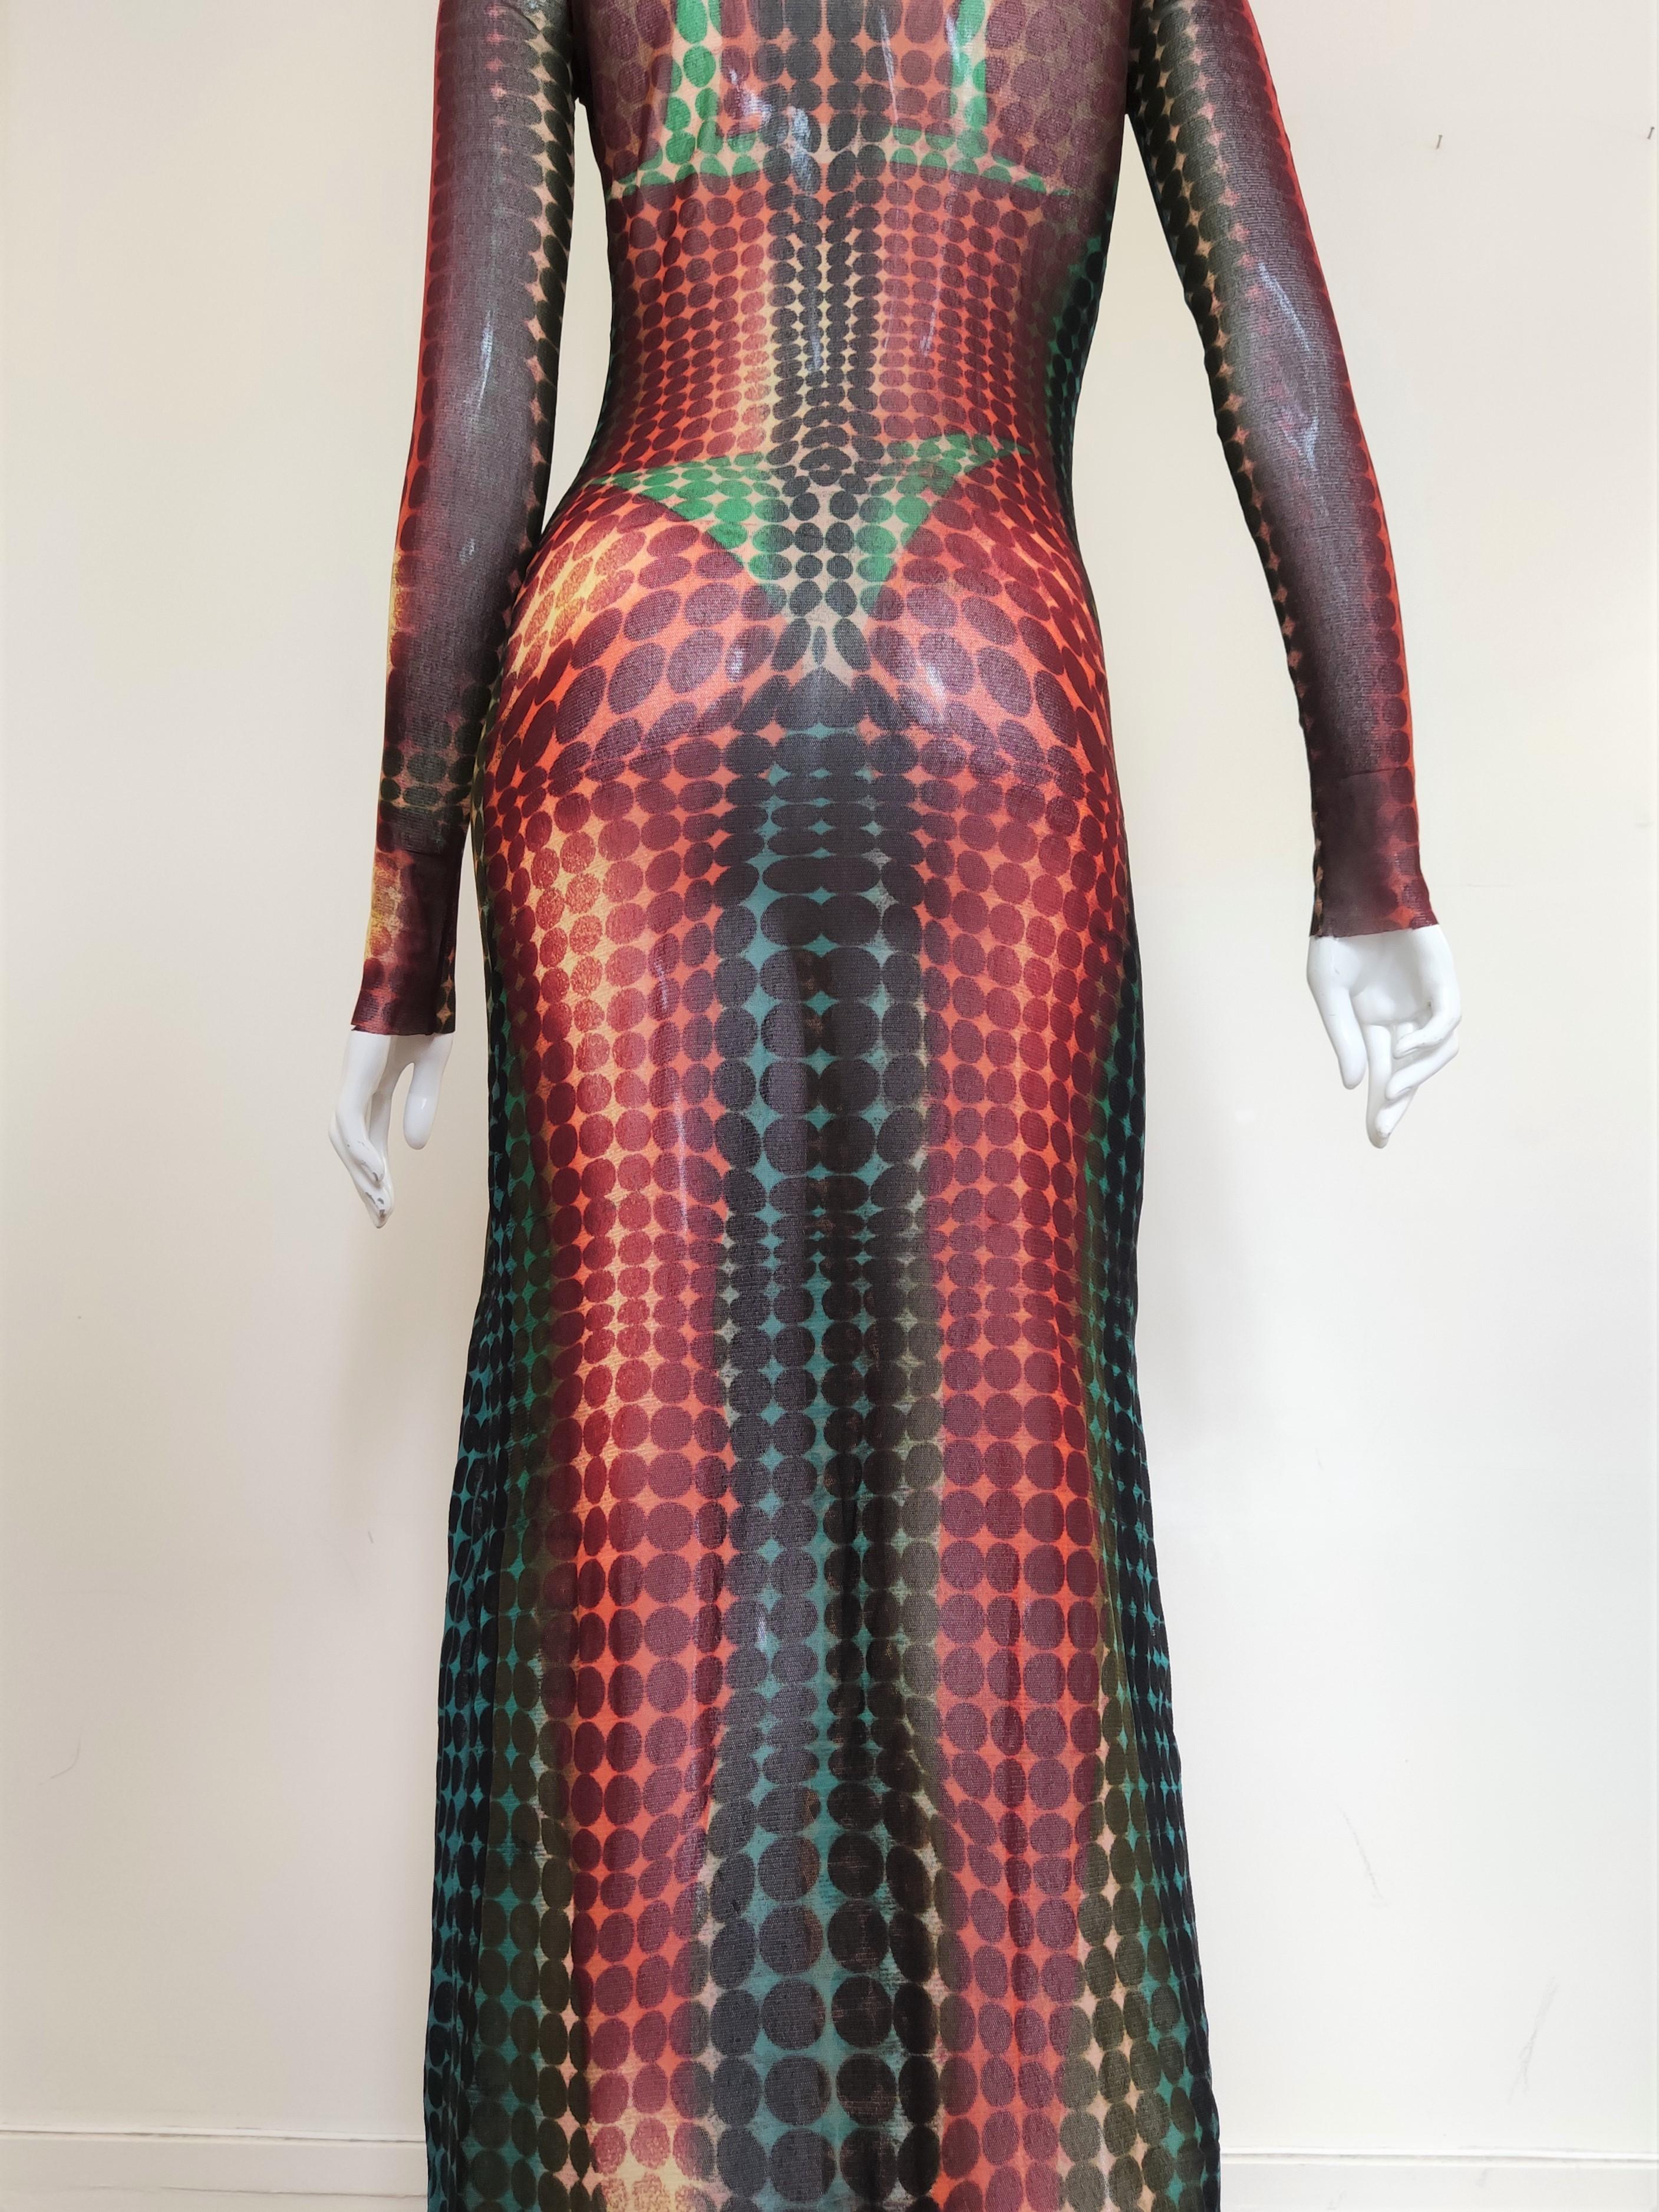 Iconic Jean Paul Gaultier Cyberdot 1995 F/W Runway Haute Couture Mad Max Victor  For Sale 8